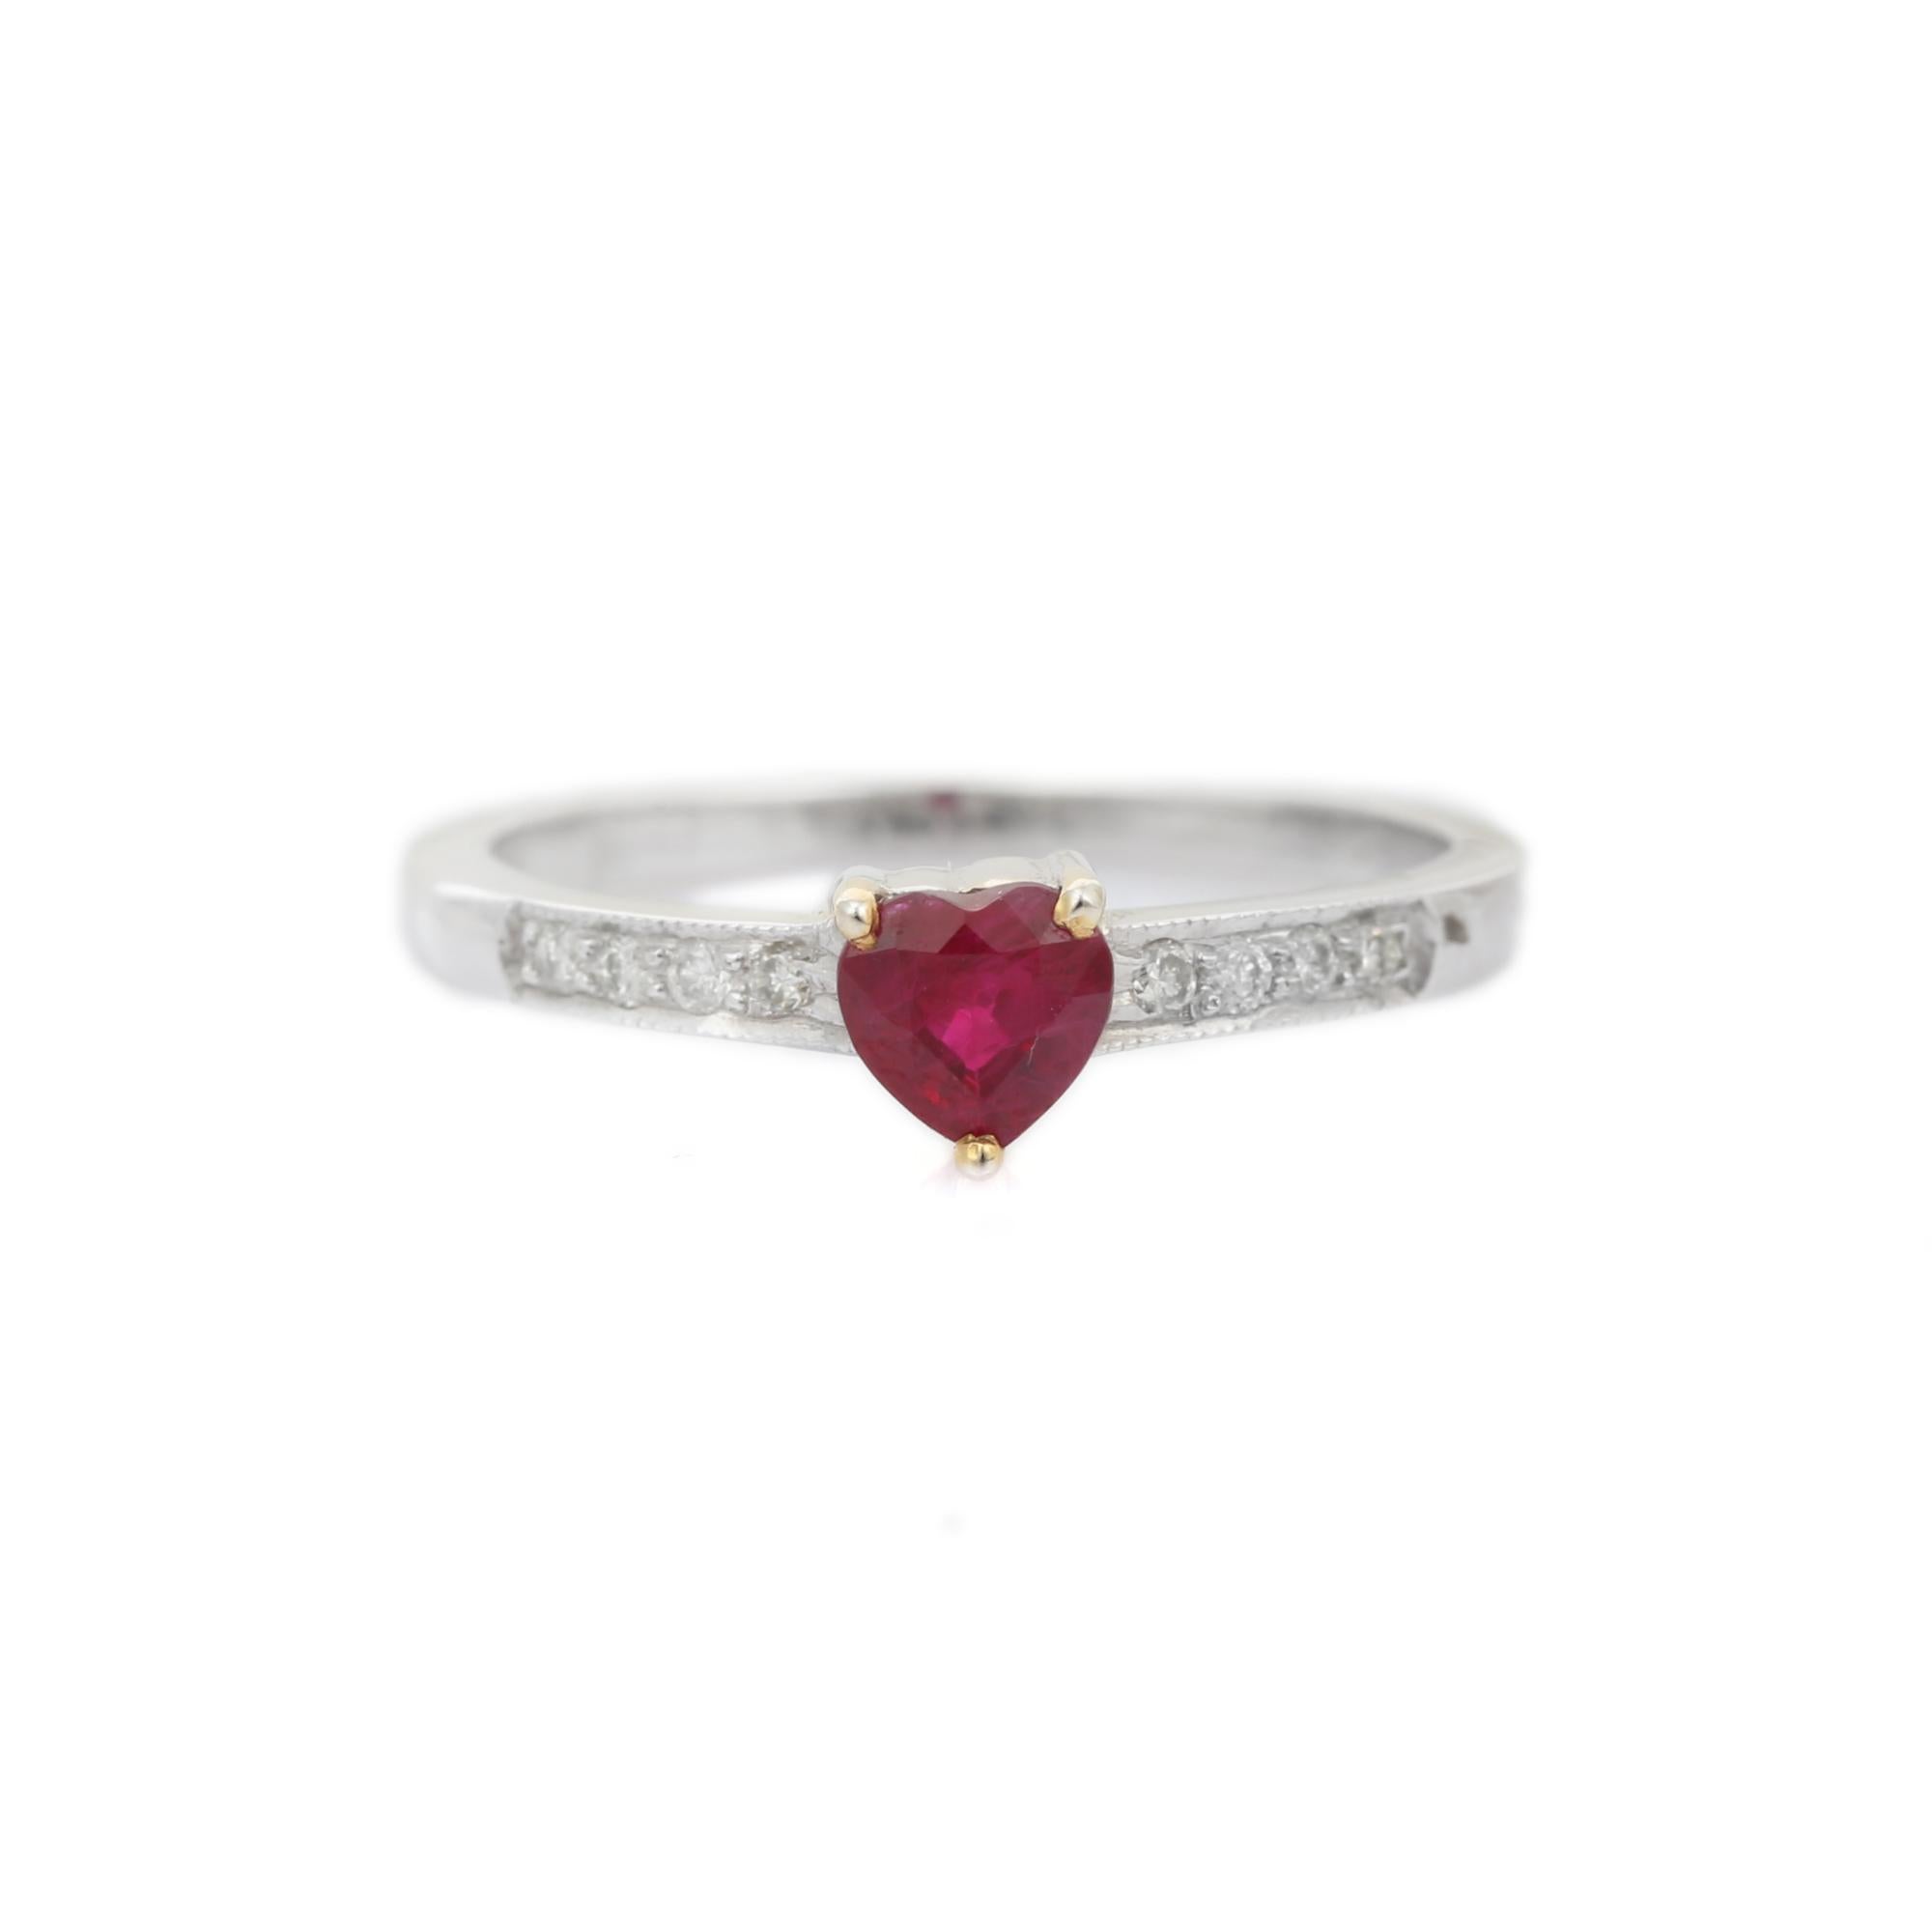 For Sale:  Dainty Heart Cut Ruby Ring 18k Solid White Gold with Diamonds 2